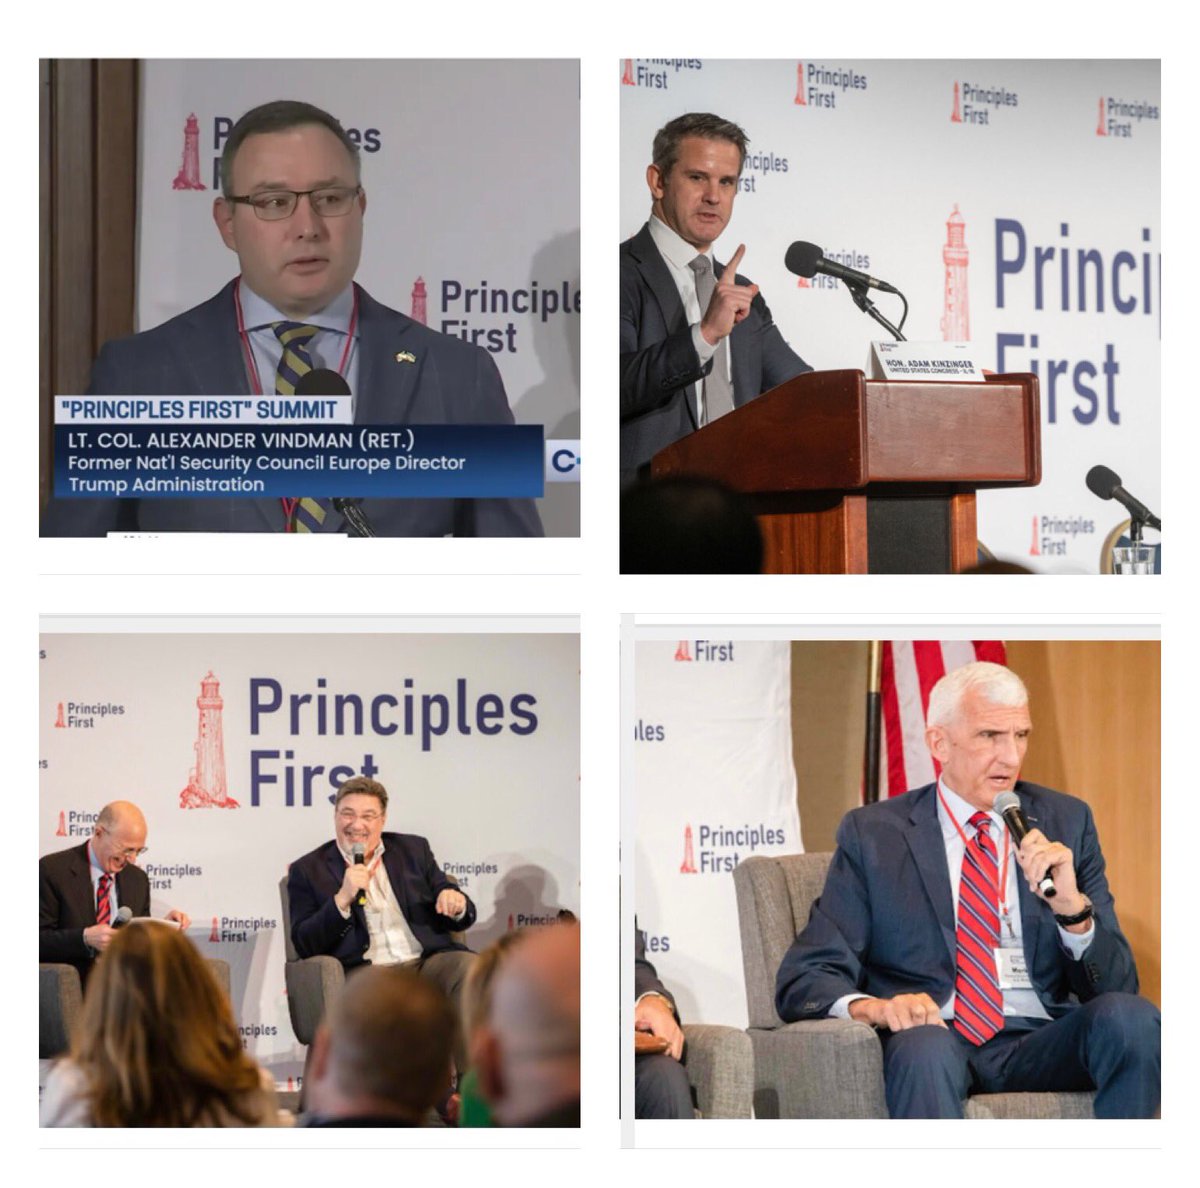 Now might be a great time to point out that at @Principles_1st summits, we’ve had experts on #Ukraine #Russia speak. Serious movements recruit serious speakers on serious topics. #PrinciplesFirst @AVindman @AdamKinzinger @RadioFreeTom @MarkHertling #RussiaUkraineWar